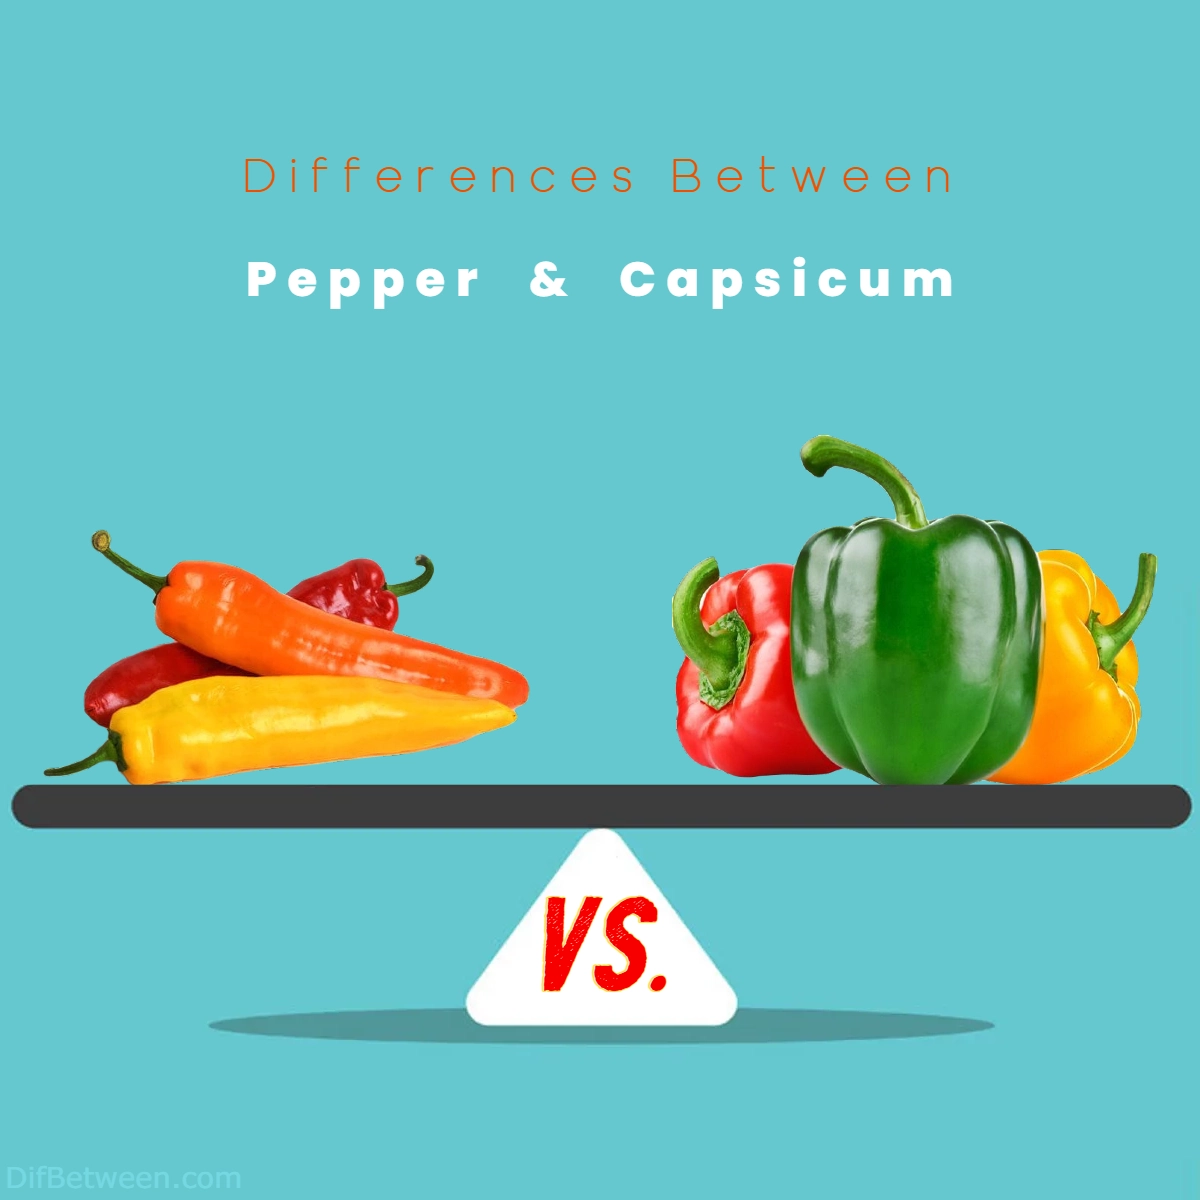 Differences Between Pepper and Capsicum